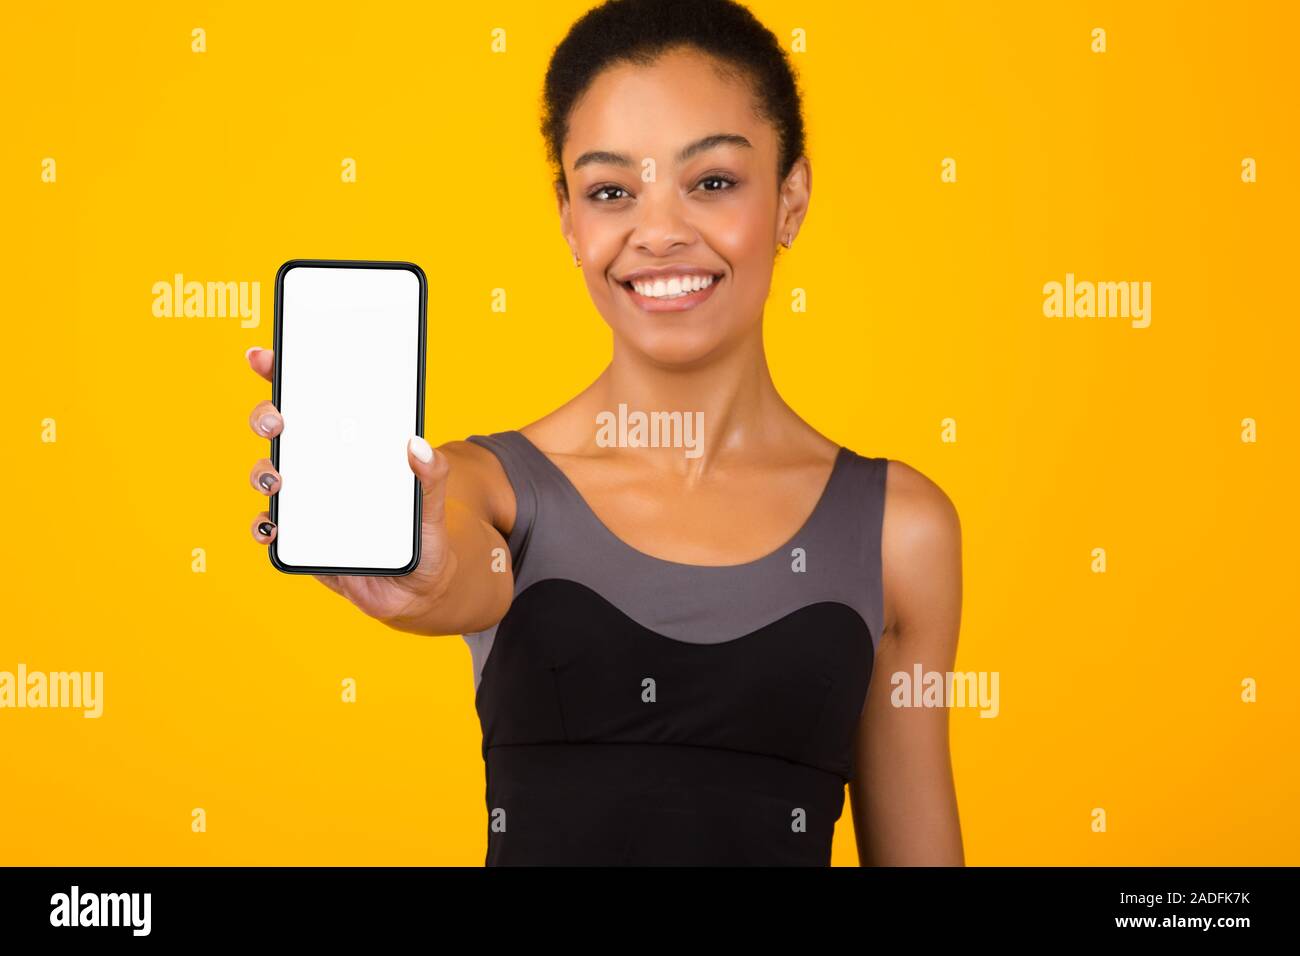 Fit Black Girl Showing Phone Blank Screen Standing, Yellow Background Stock  Photo - Alamy